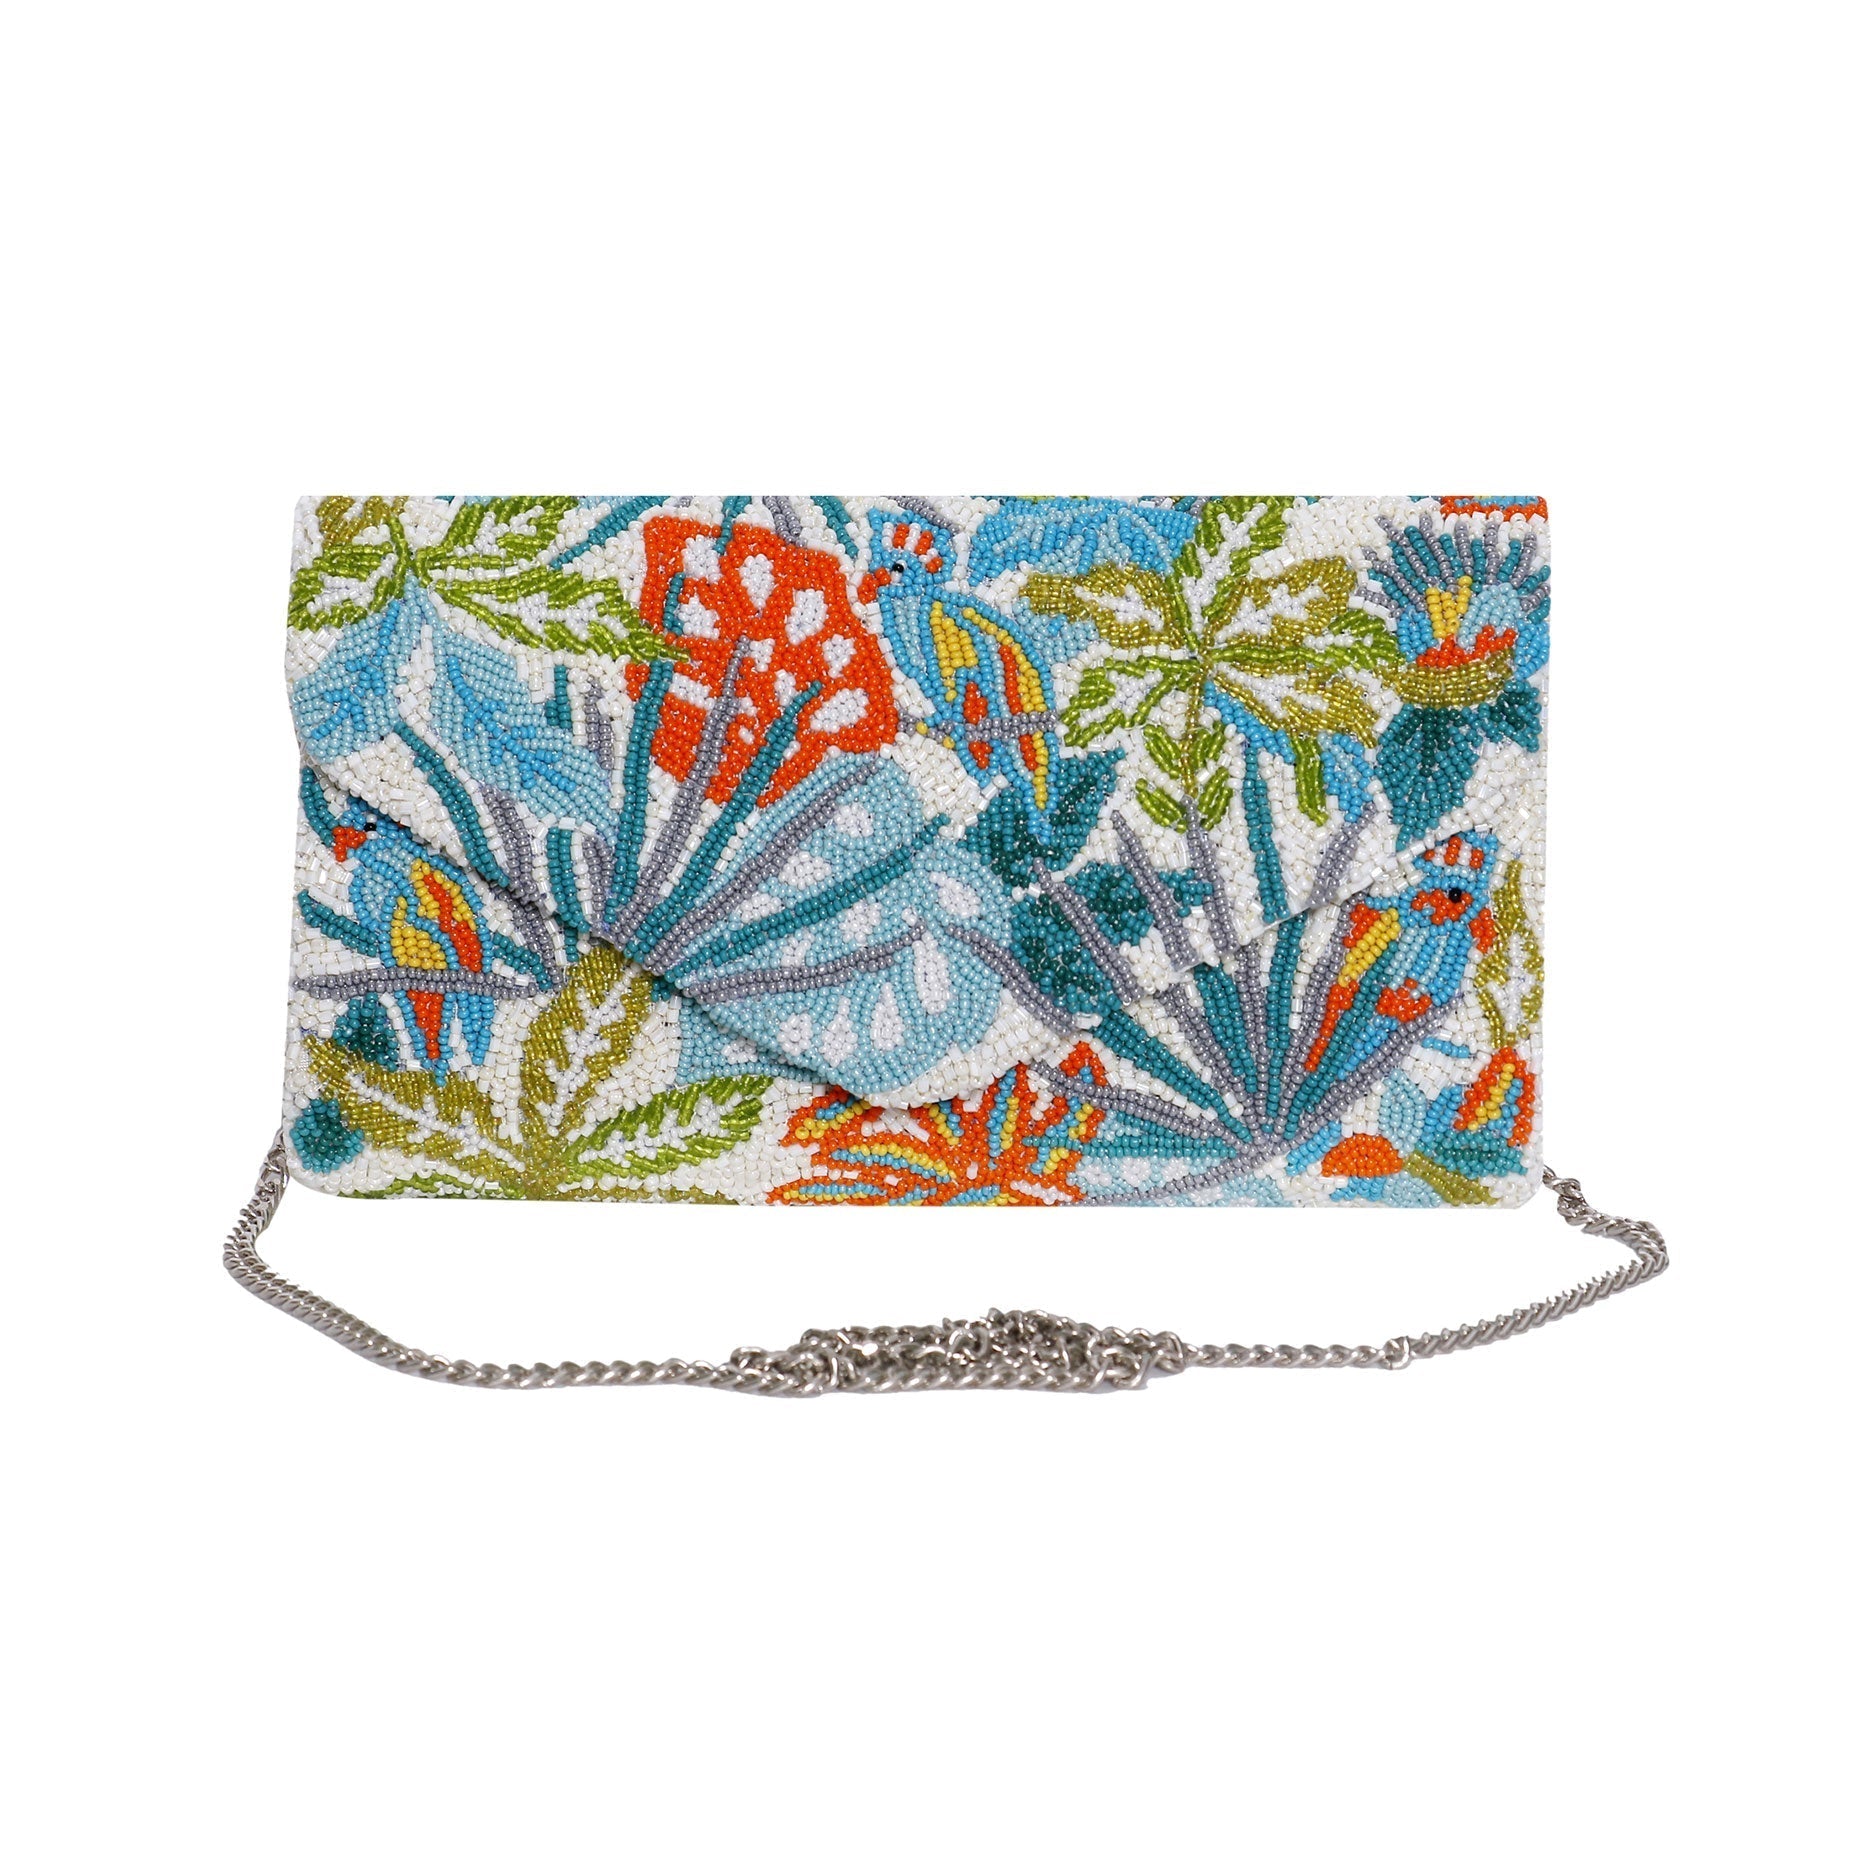 tiana ny designs natural beauty envelope clutch 41579534745907